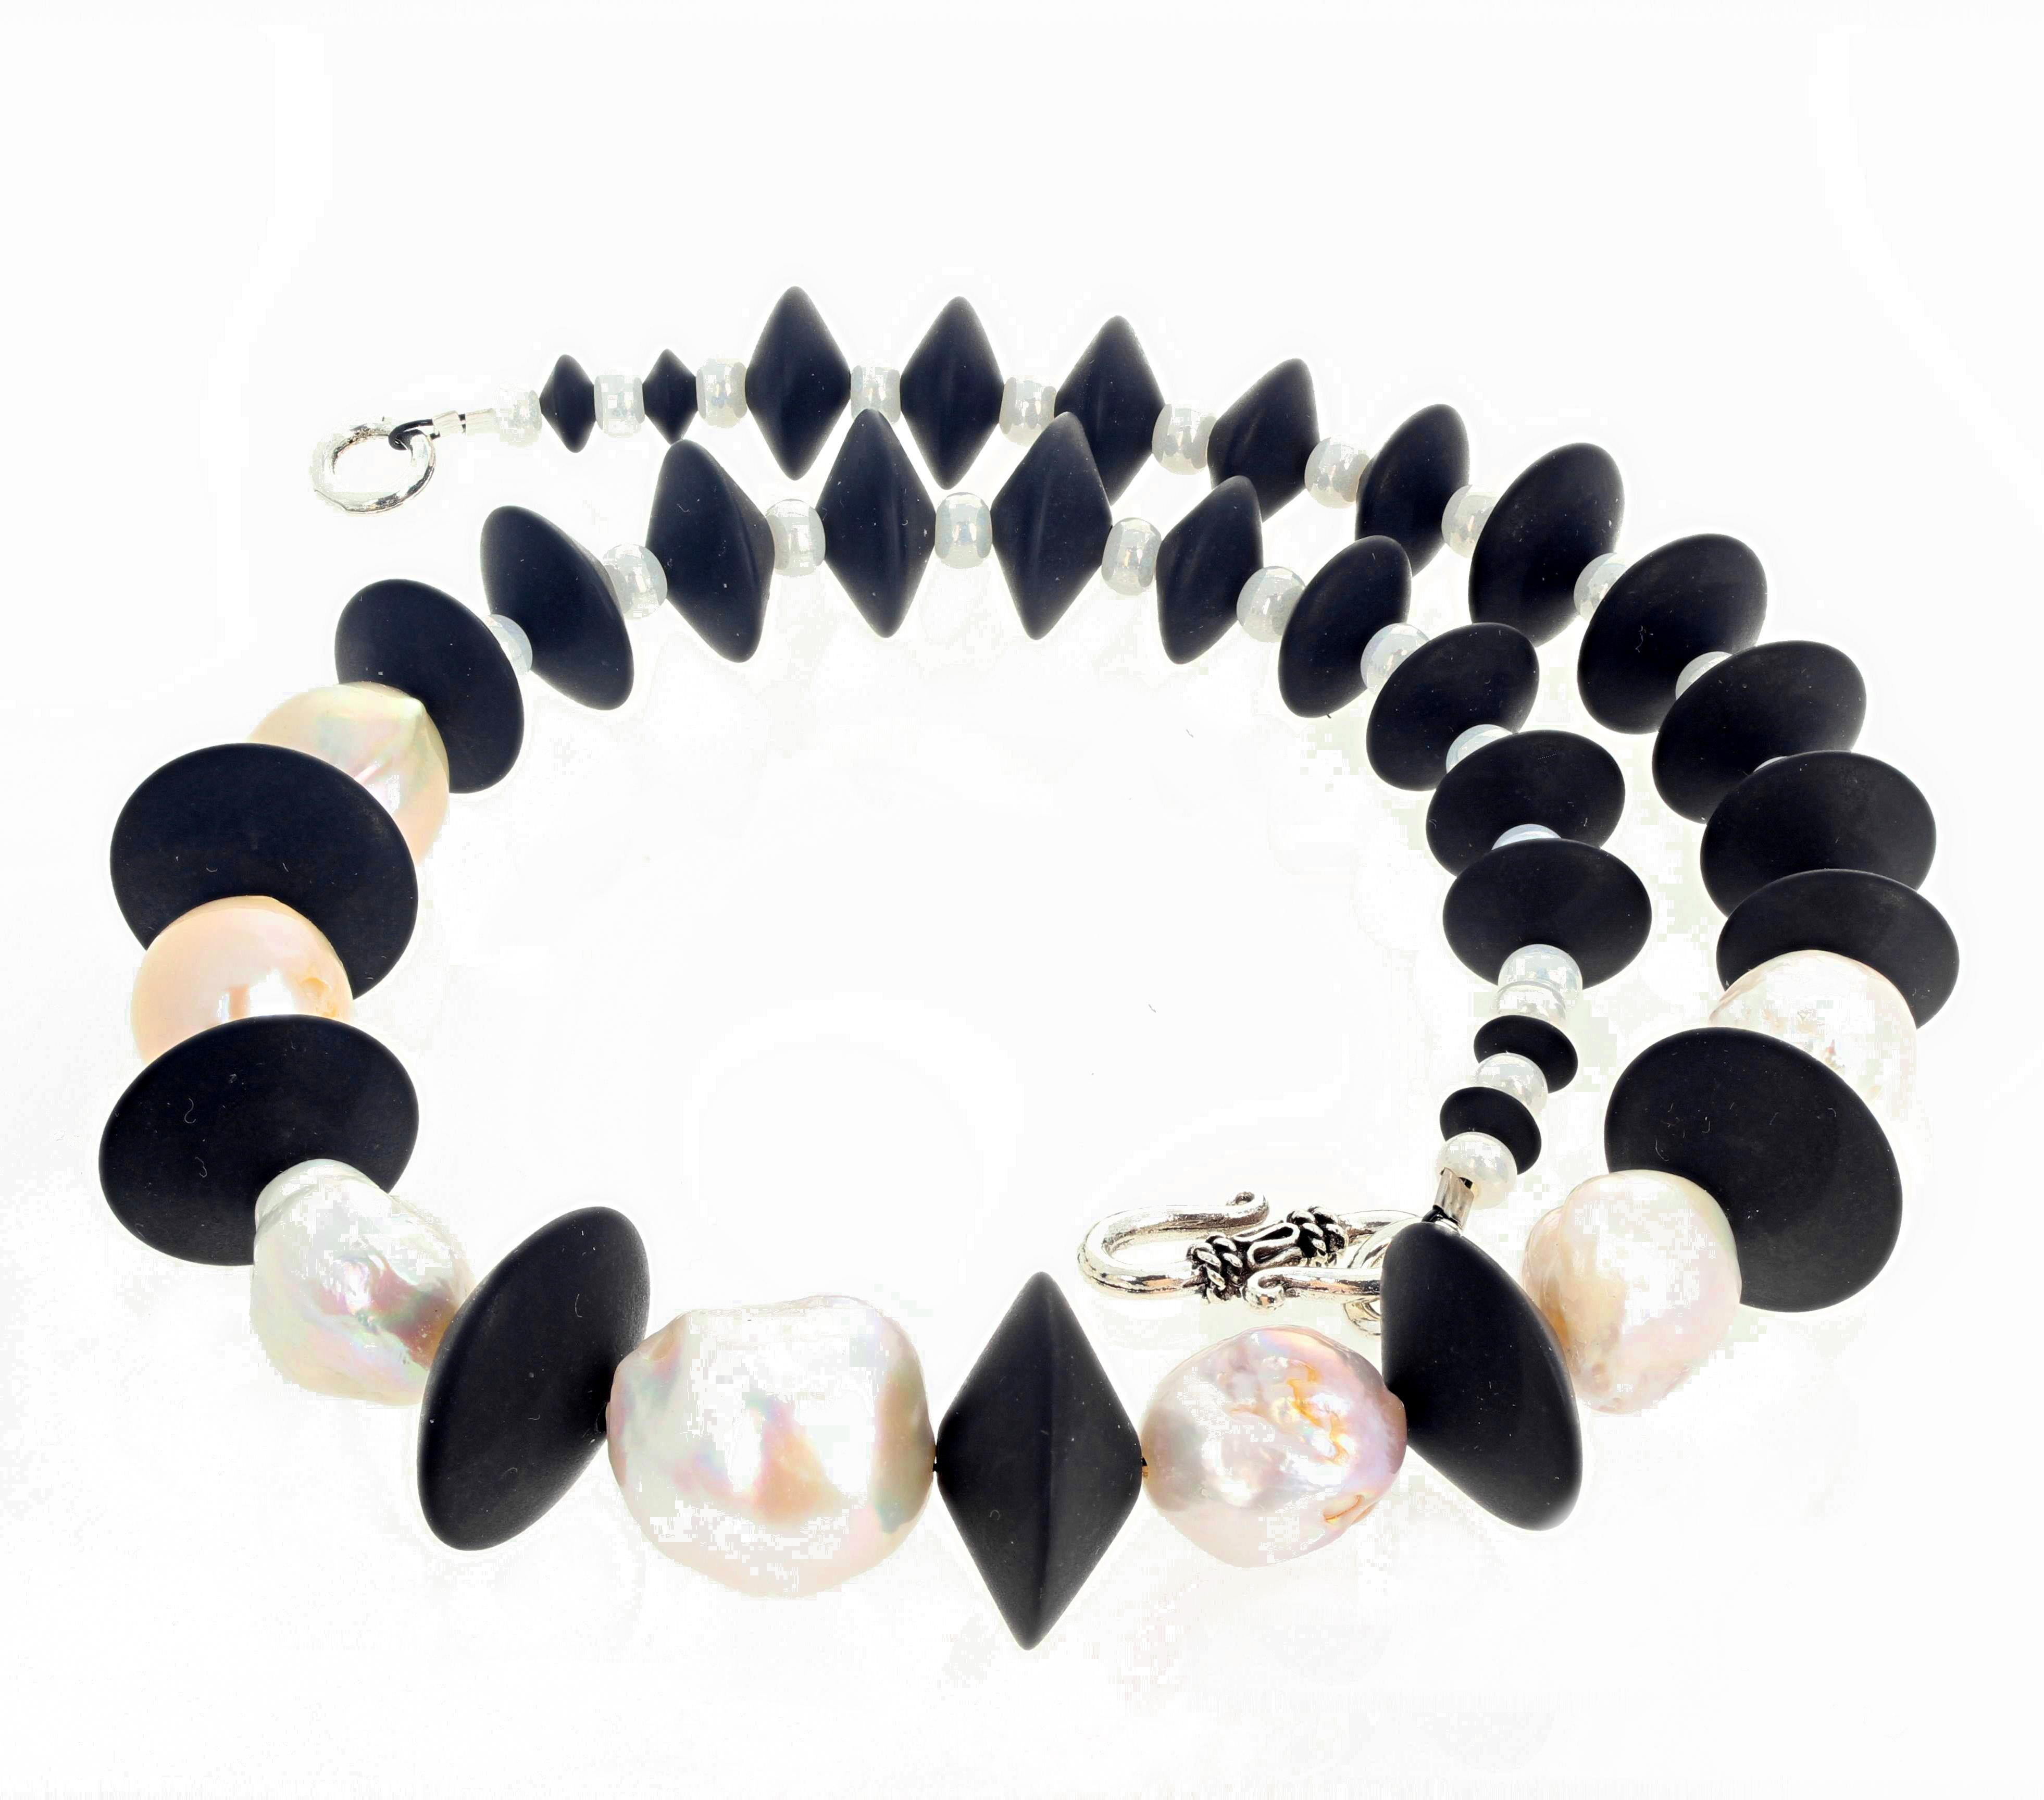 Amazing different glowing natural Pearls enhanced with lovely polished natural Black Onyx rondels set in this superbly elegant 17 inch long necklace with silver hook clasp.  The largest pearl is 17 mm.   If you wish faster delivery on your purchase